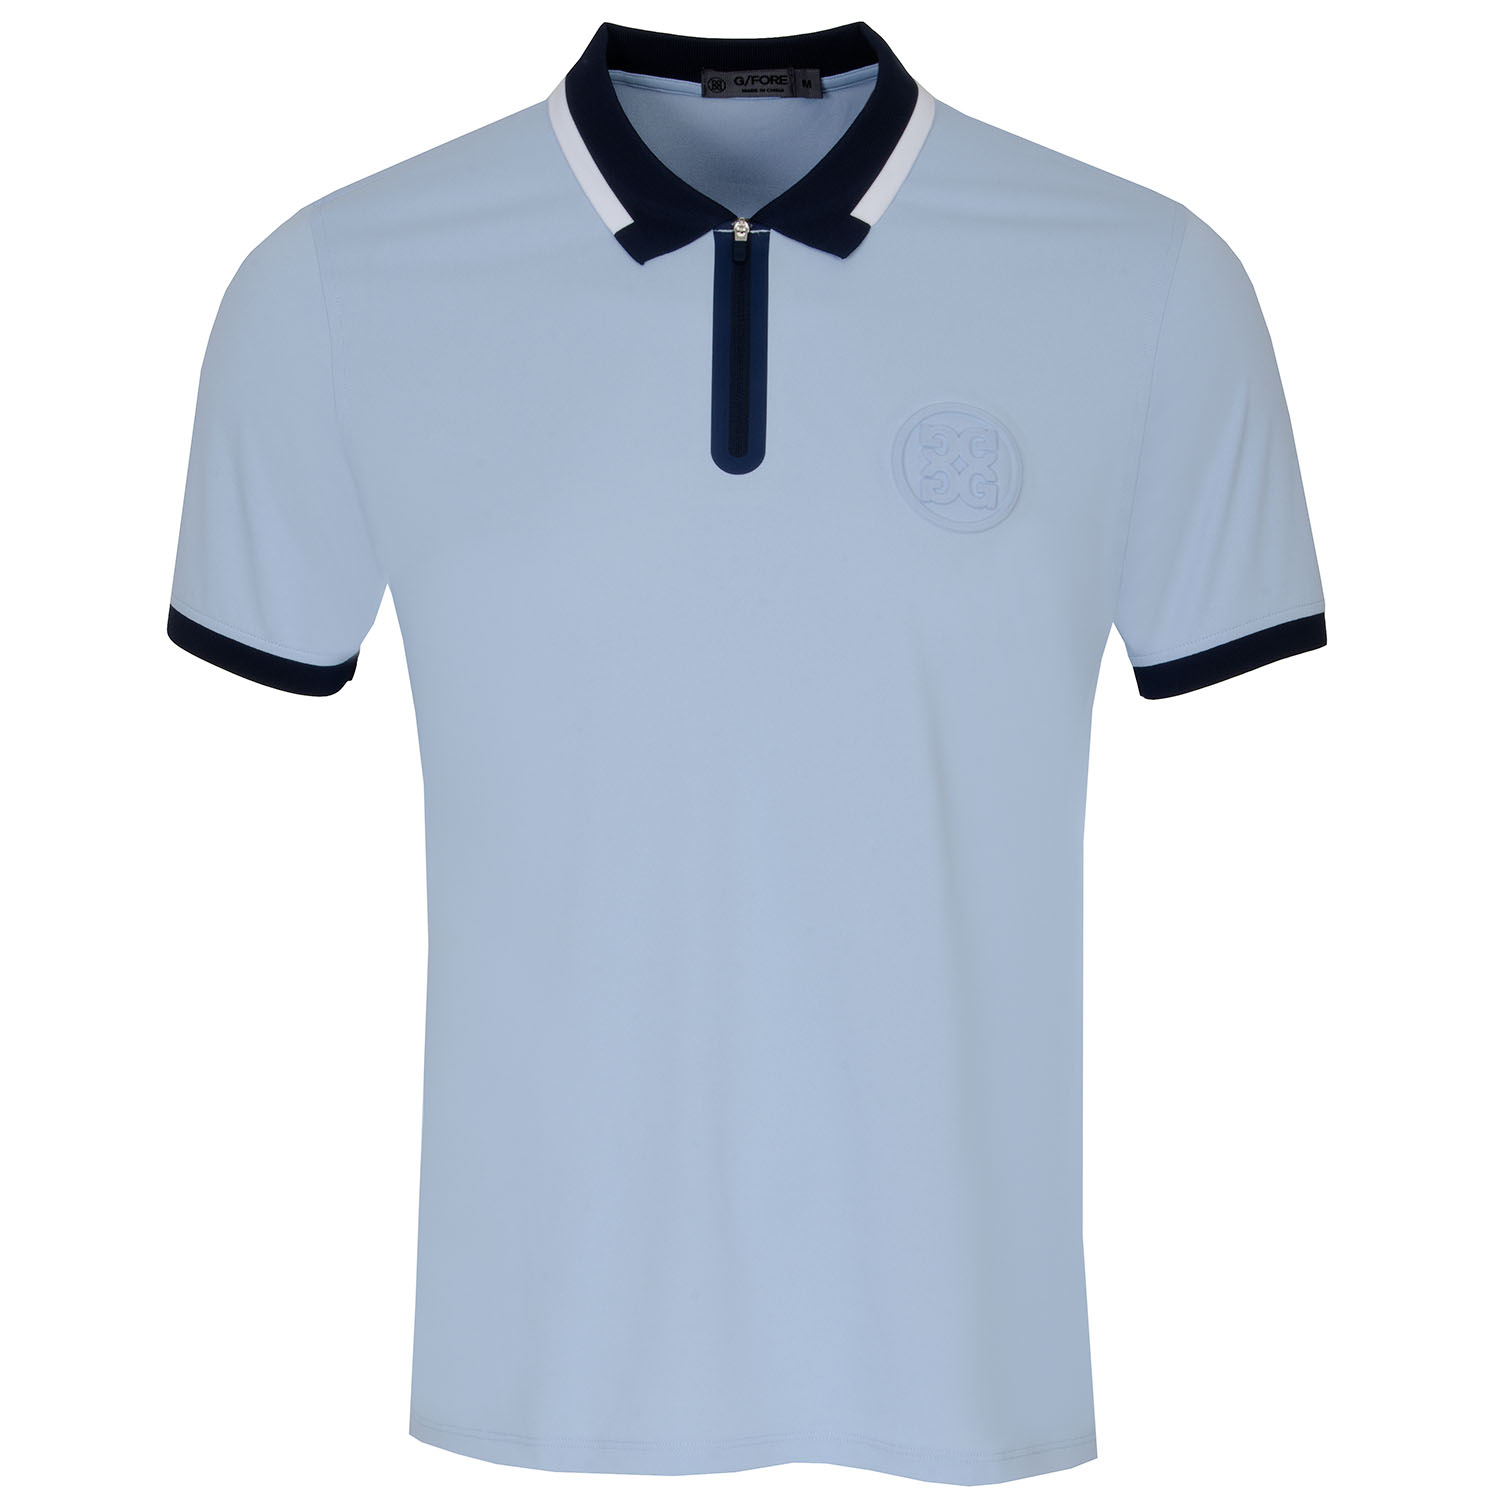 G/FORE Embossed Zip Neck Golf Polo Shirt